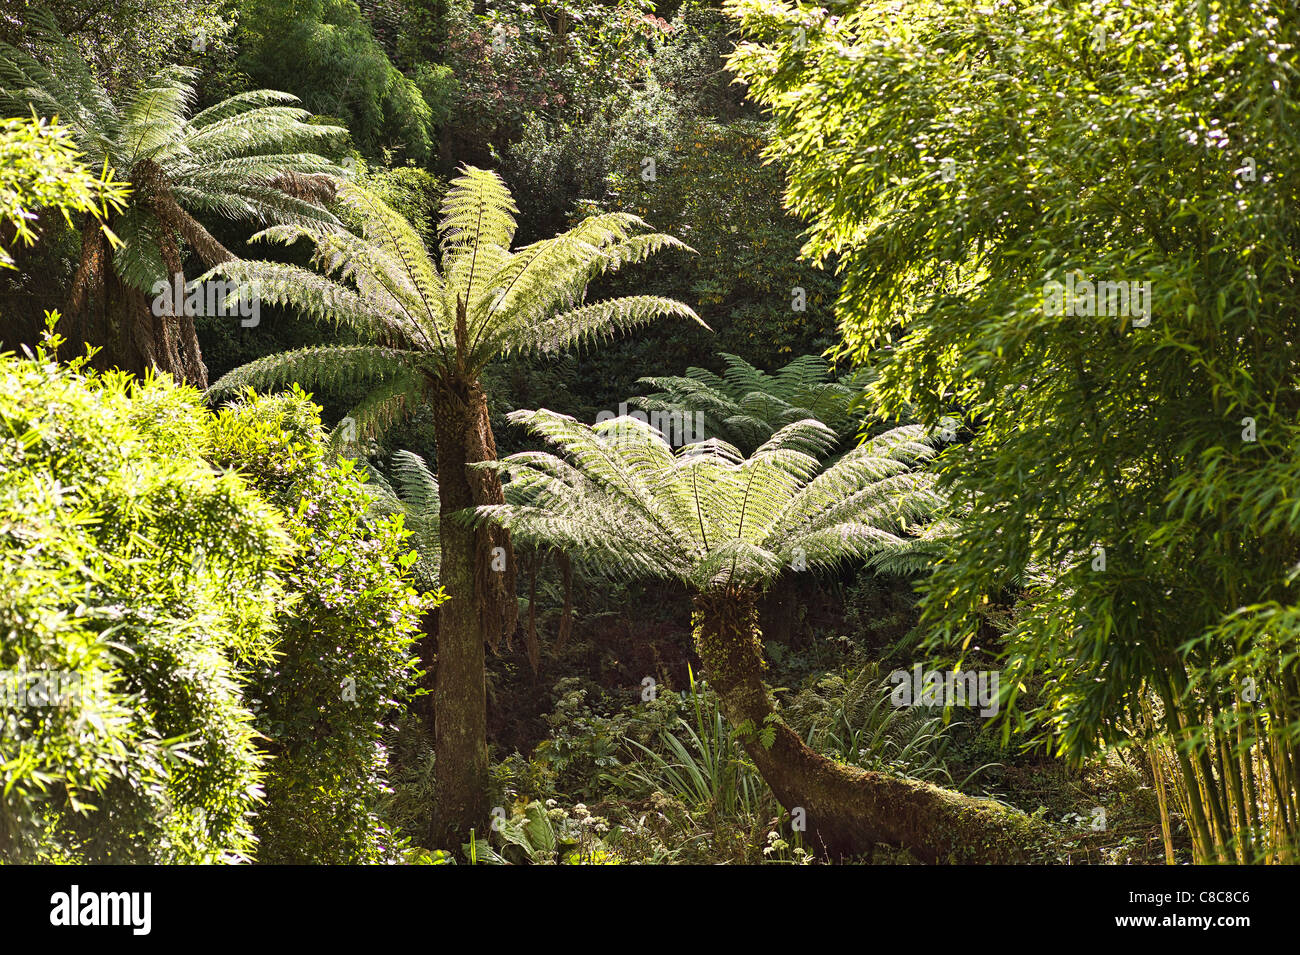 In Heligan's Jungle Garden with tree ferns and other semi-tropical plants in September Stock Photo